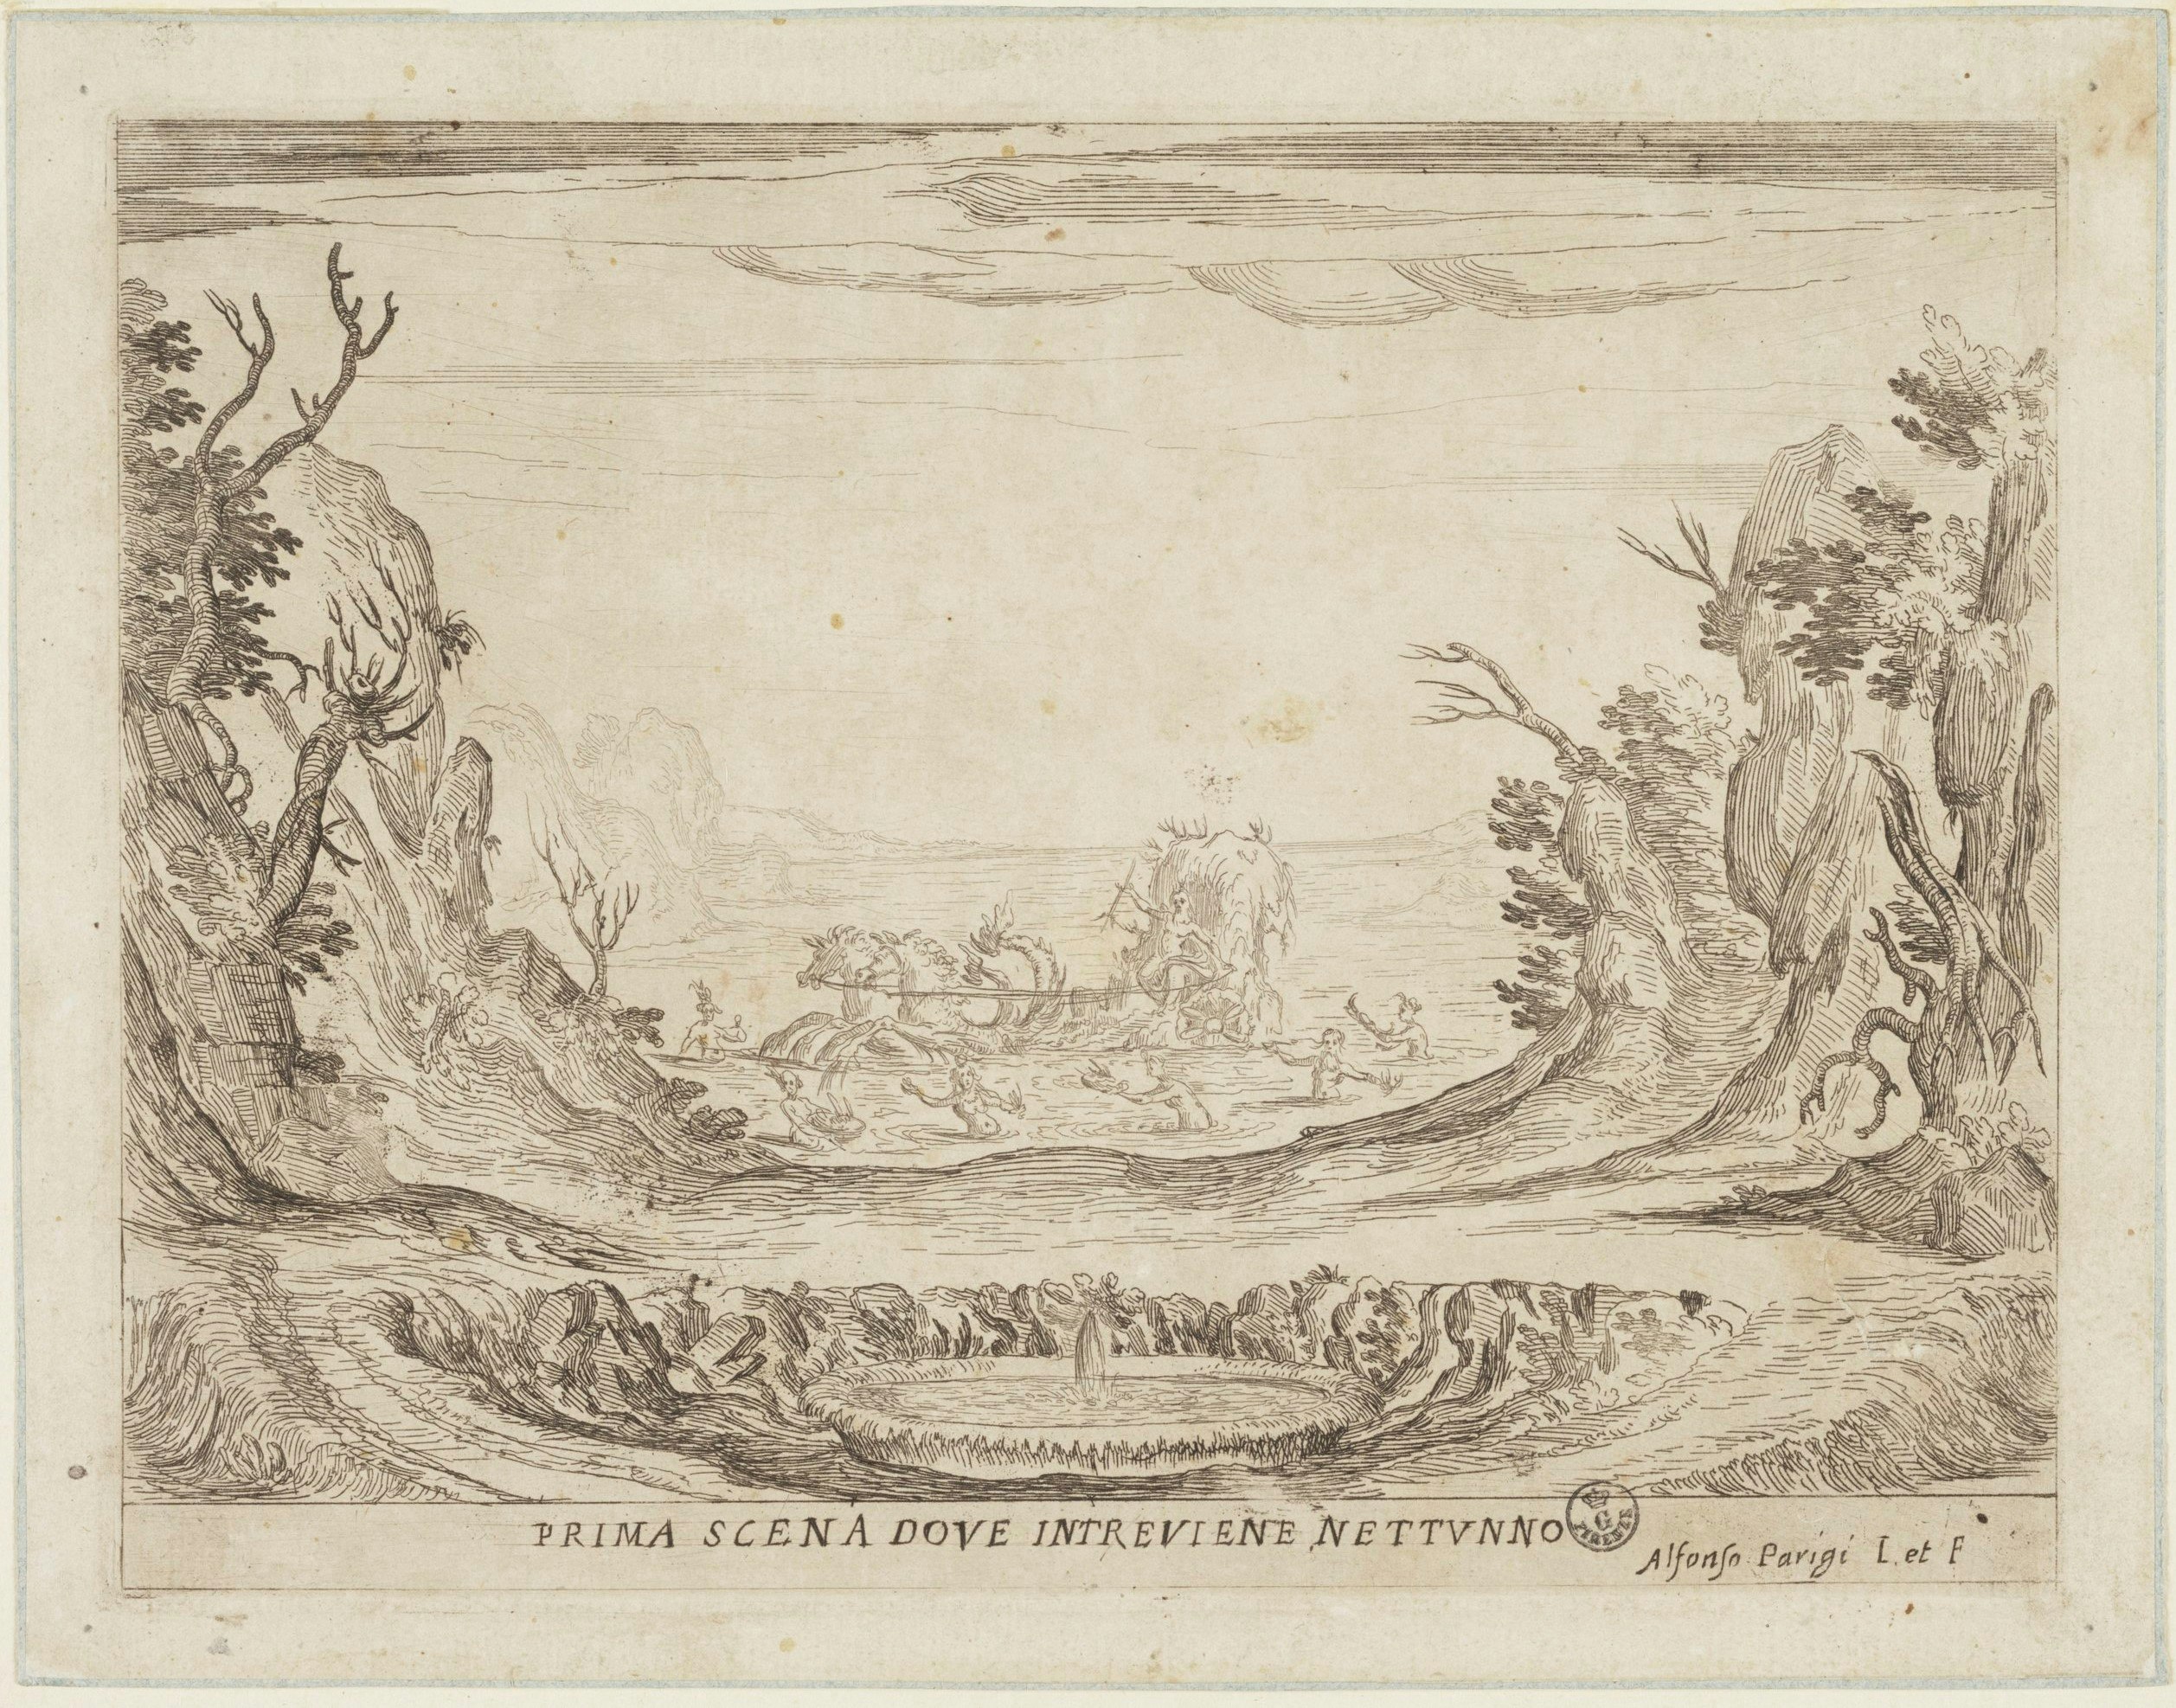 The Liberation of Ruggiero from the island of Alcina. First scene in which Neptune intervenes